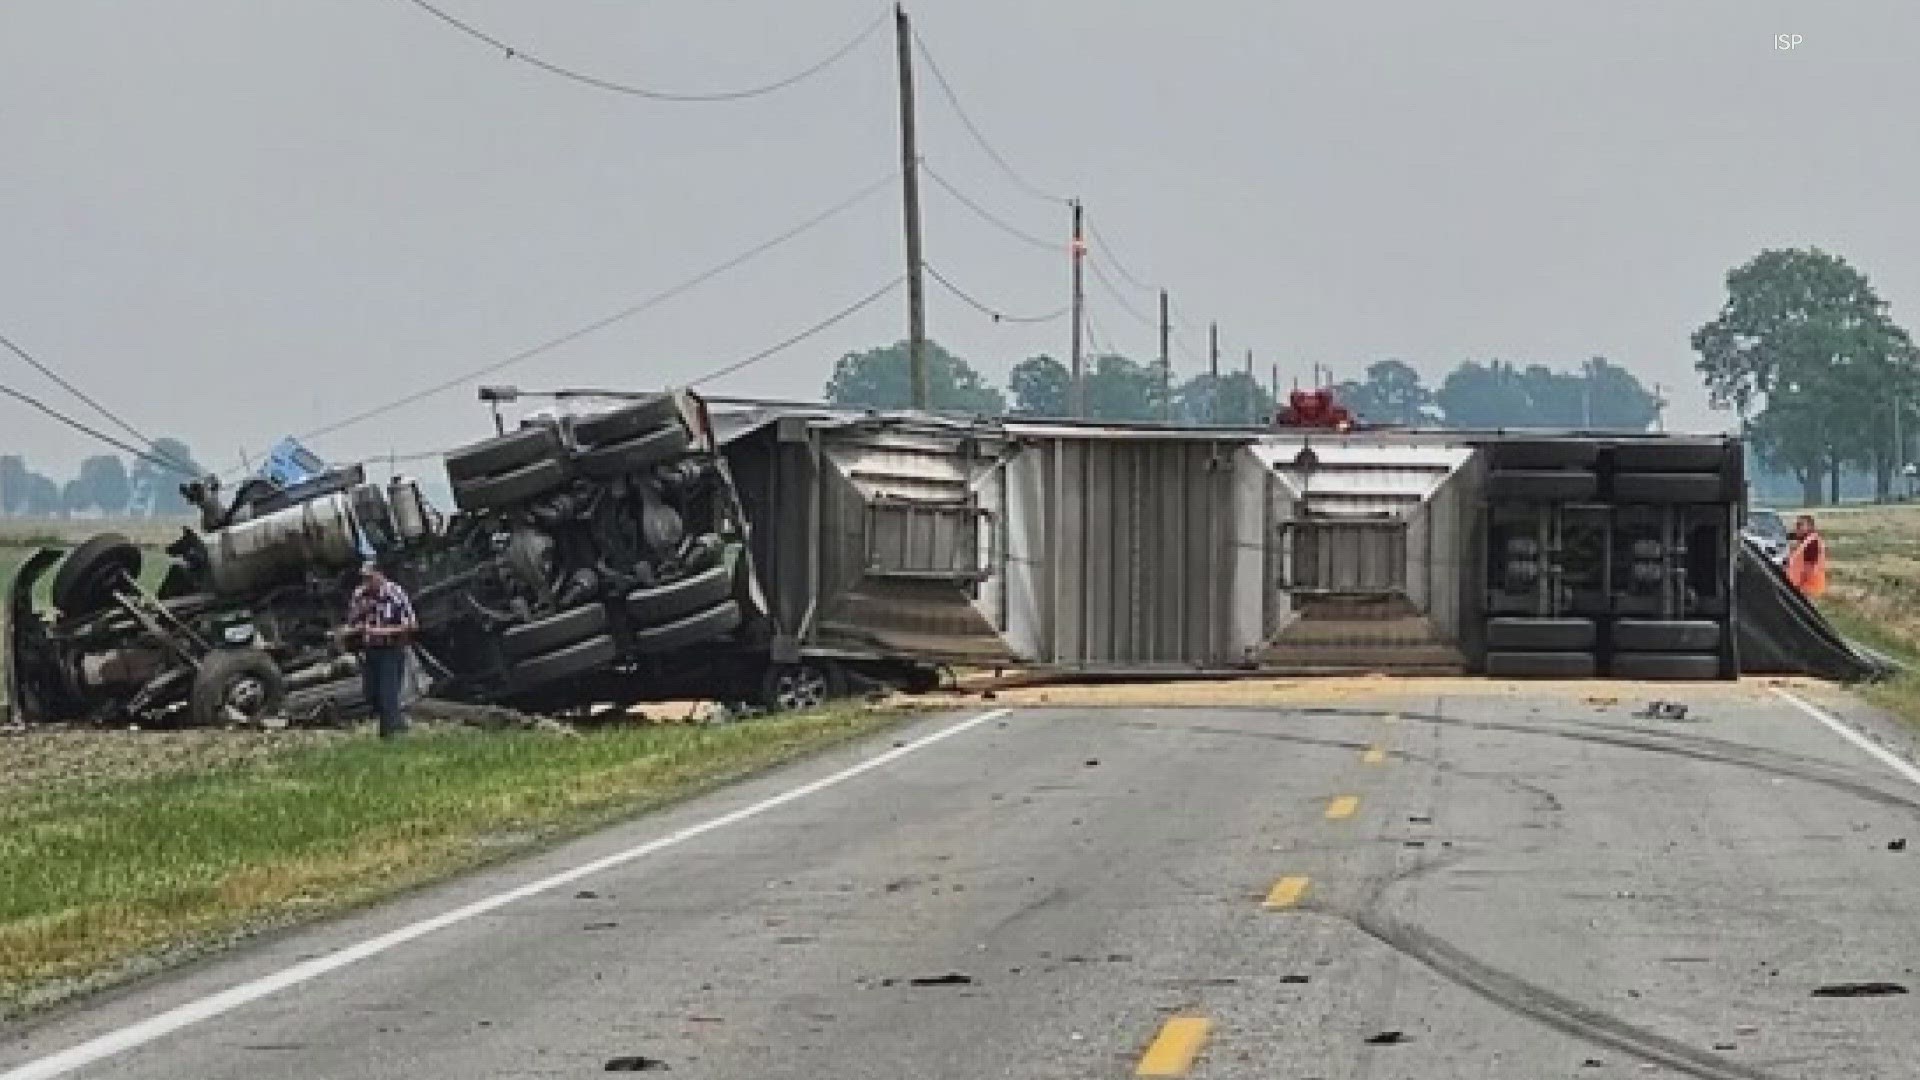 Police said a 17-year-old driver tried to pass two pickup trucks on State Road 28 Monday afternoon when it sideswiped one of the pickup trucks and a semi-truck.